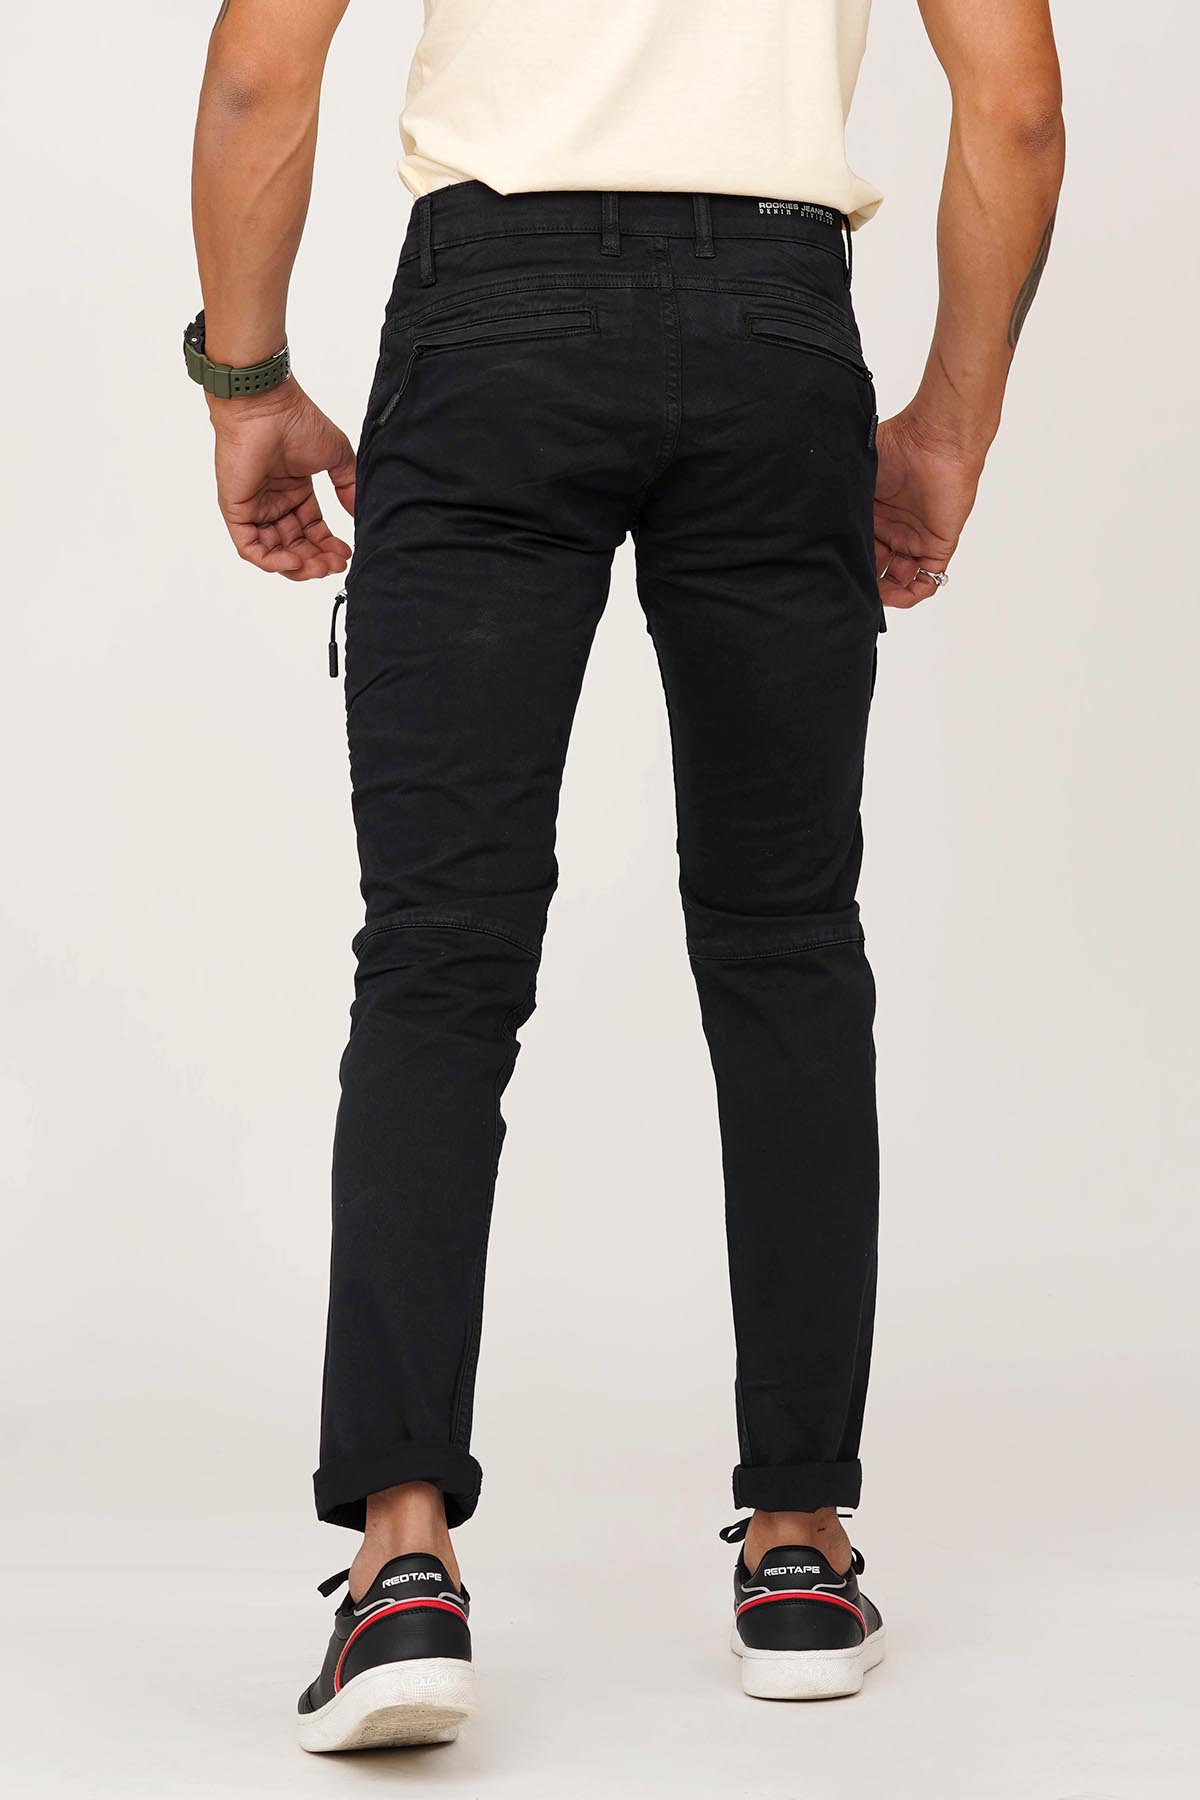 Rookies Black Cotton Solid Cargo pant